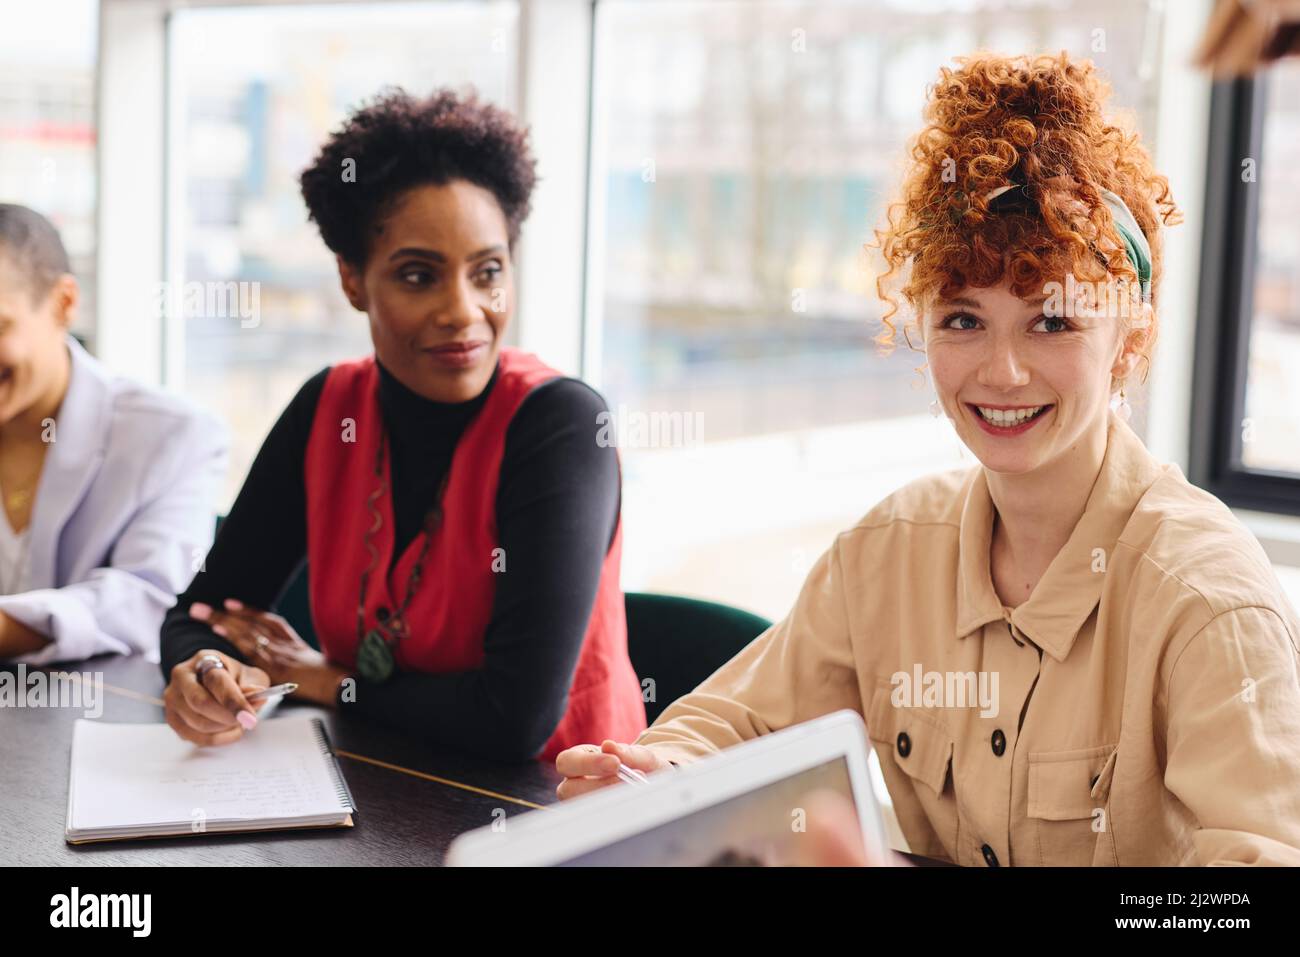 Portrait of cheerful young white businesswoman and mature black female colleague smiling in meeting Stock Photo